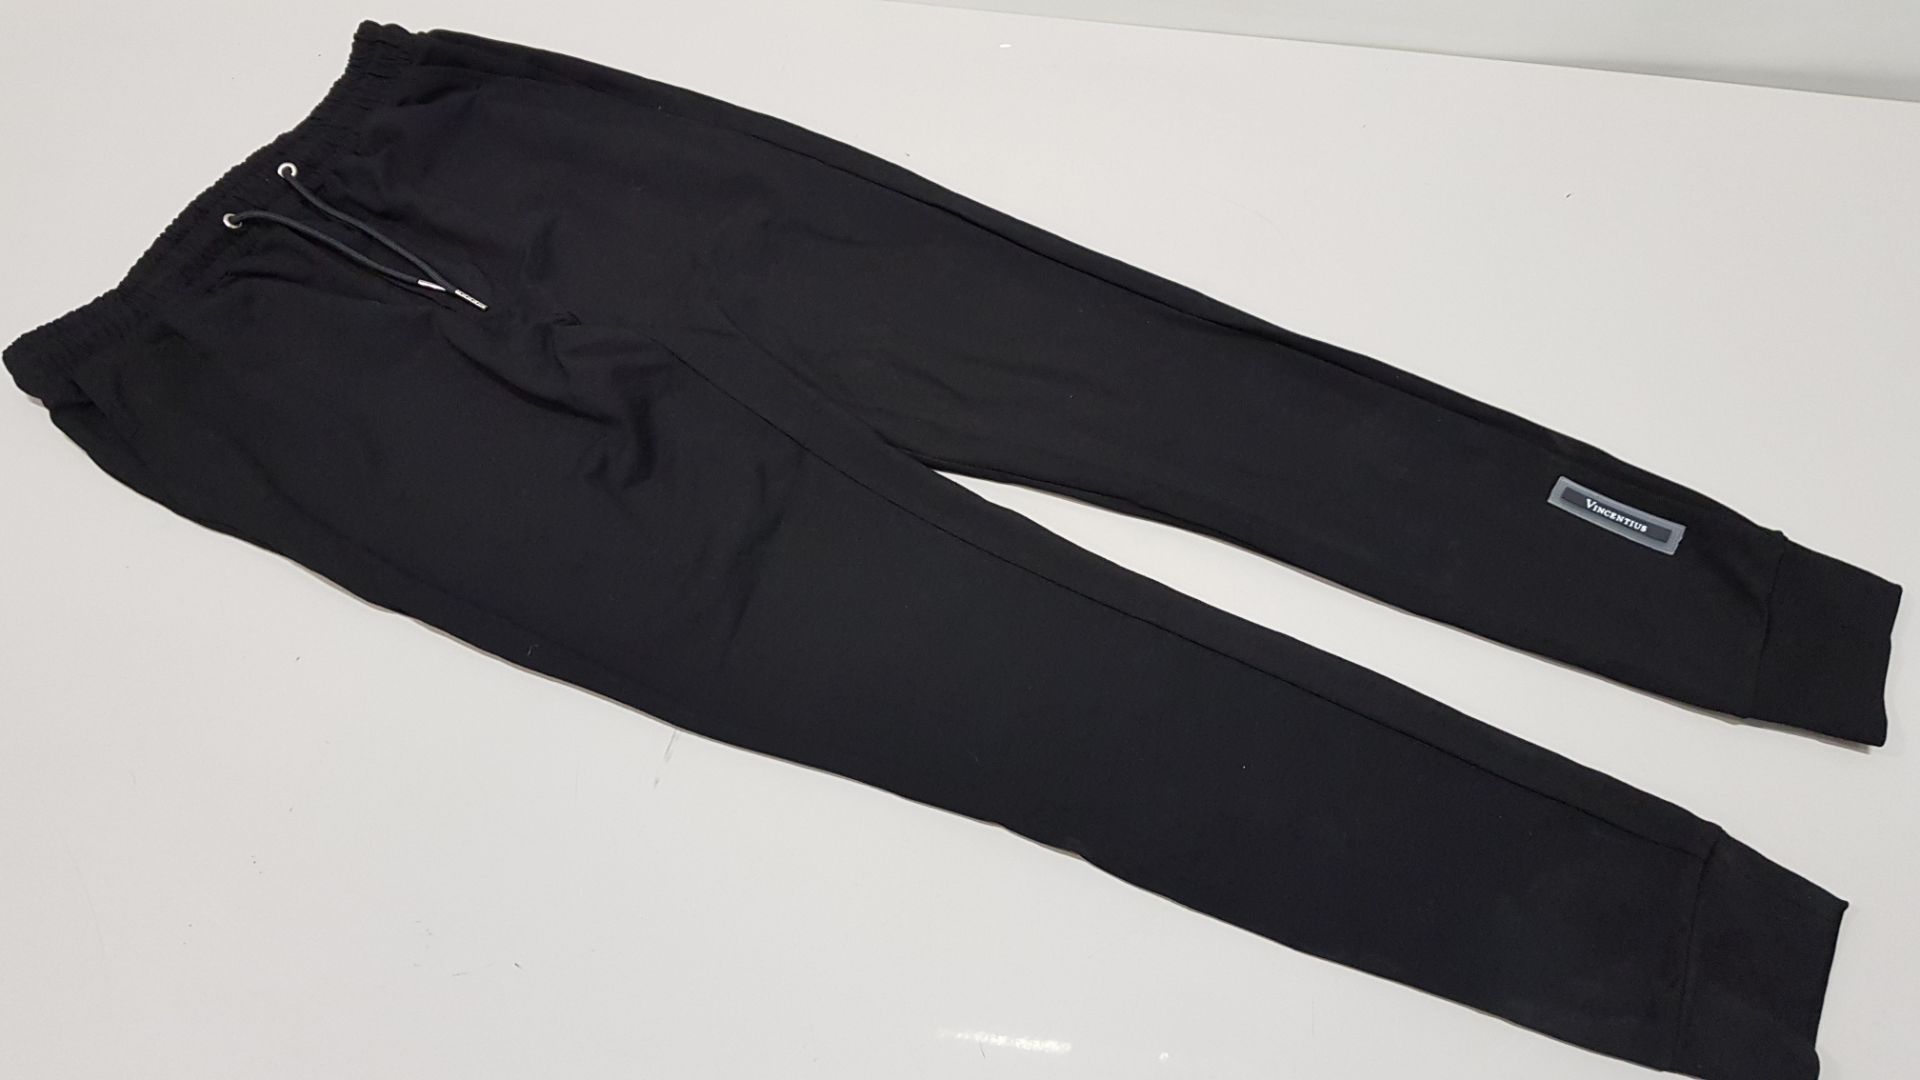 12 X BRAND NEW VINCENTIUS BLACK ADULT JOGGING PANTS IN ASST SIZES - RRP £35 PP TOTAL £420